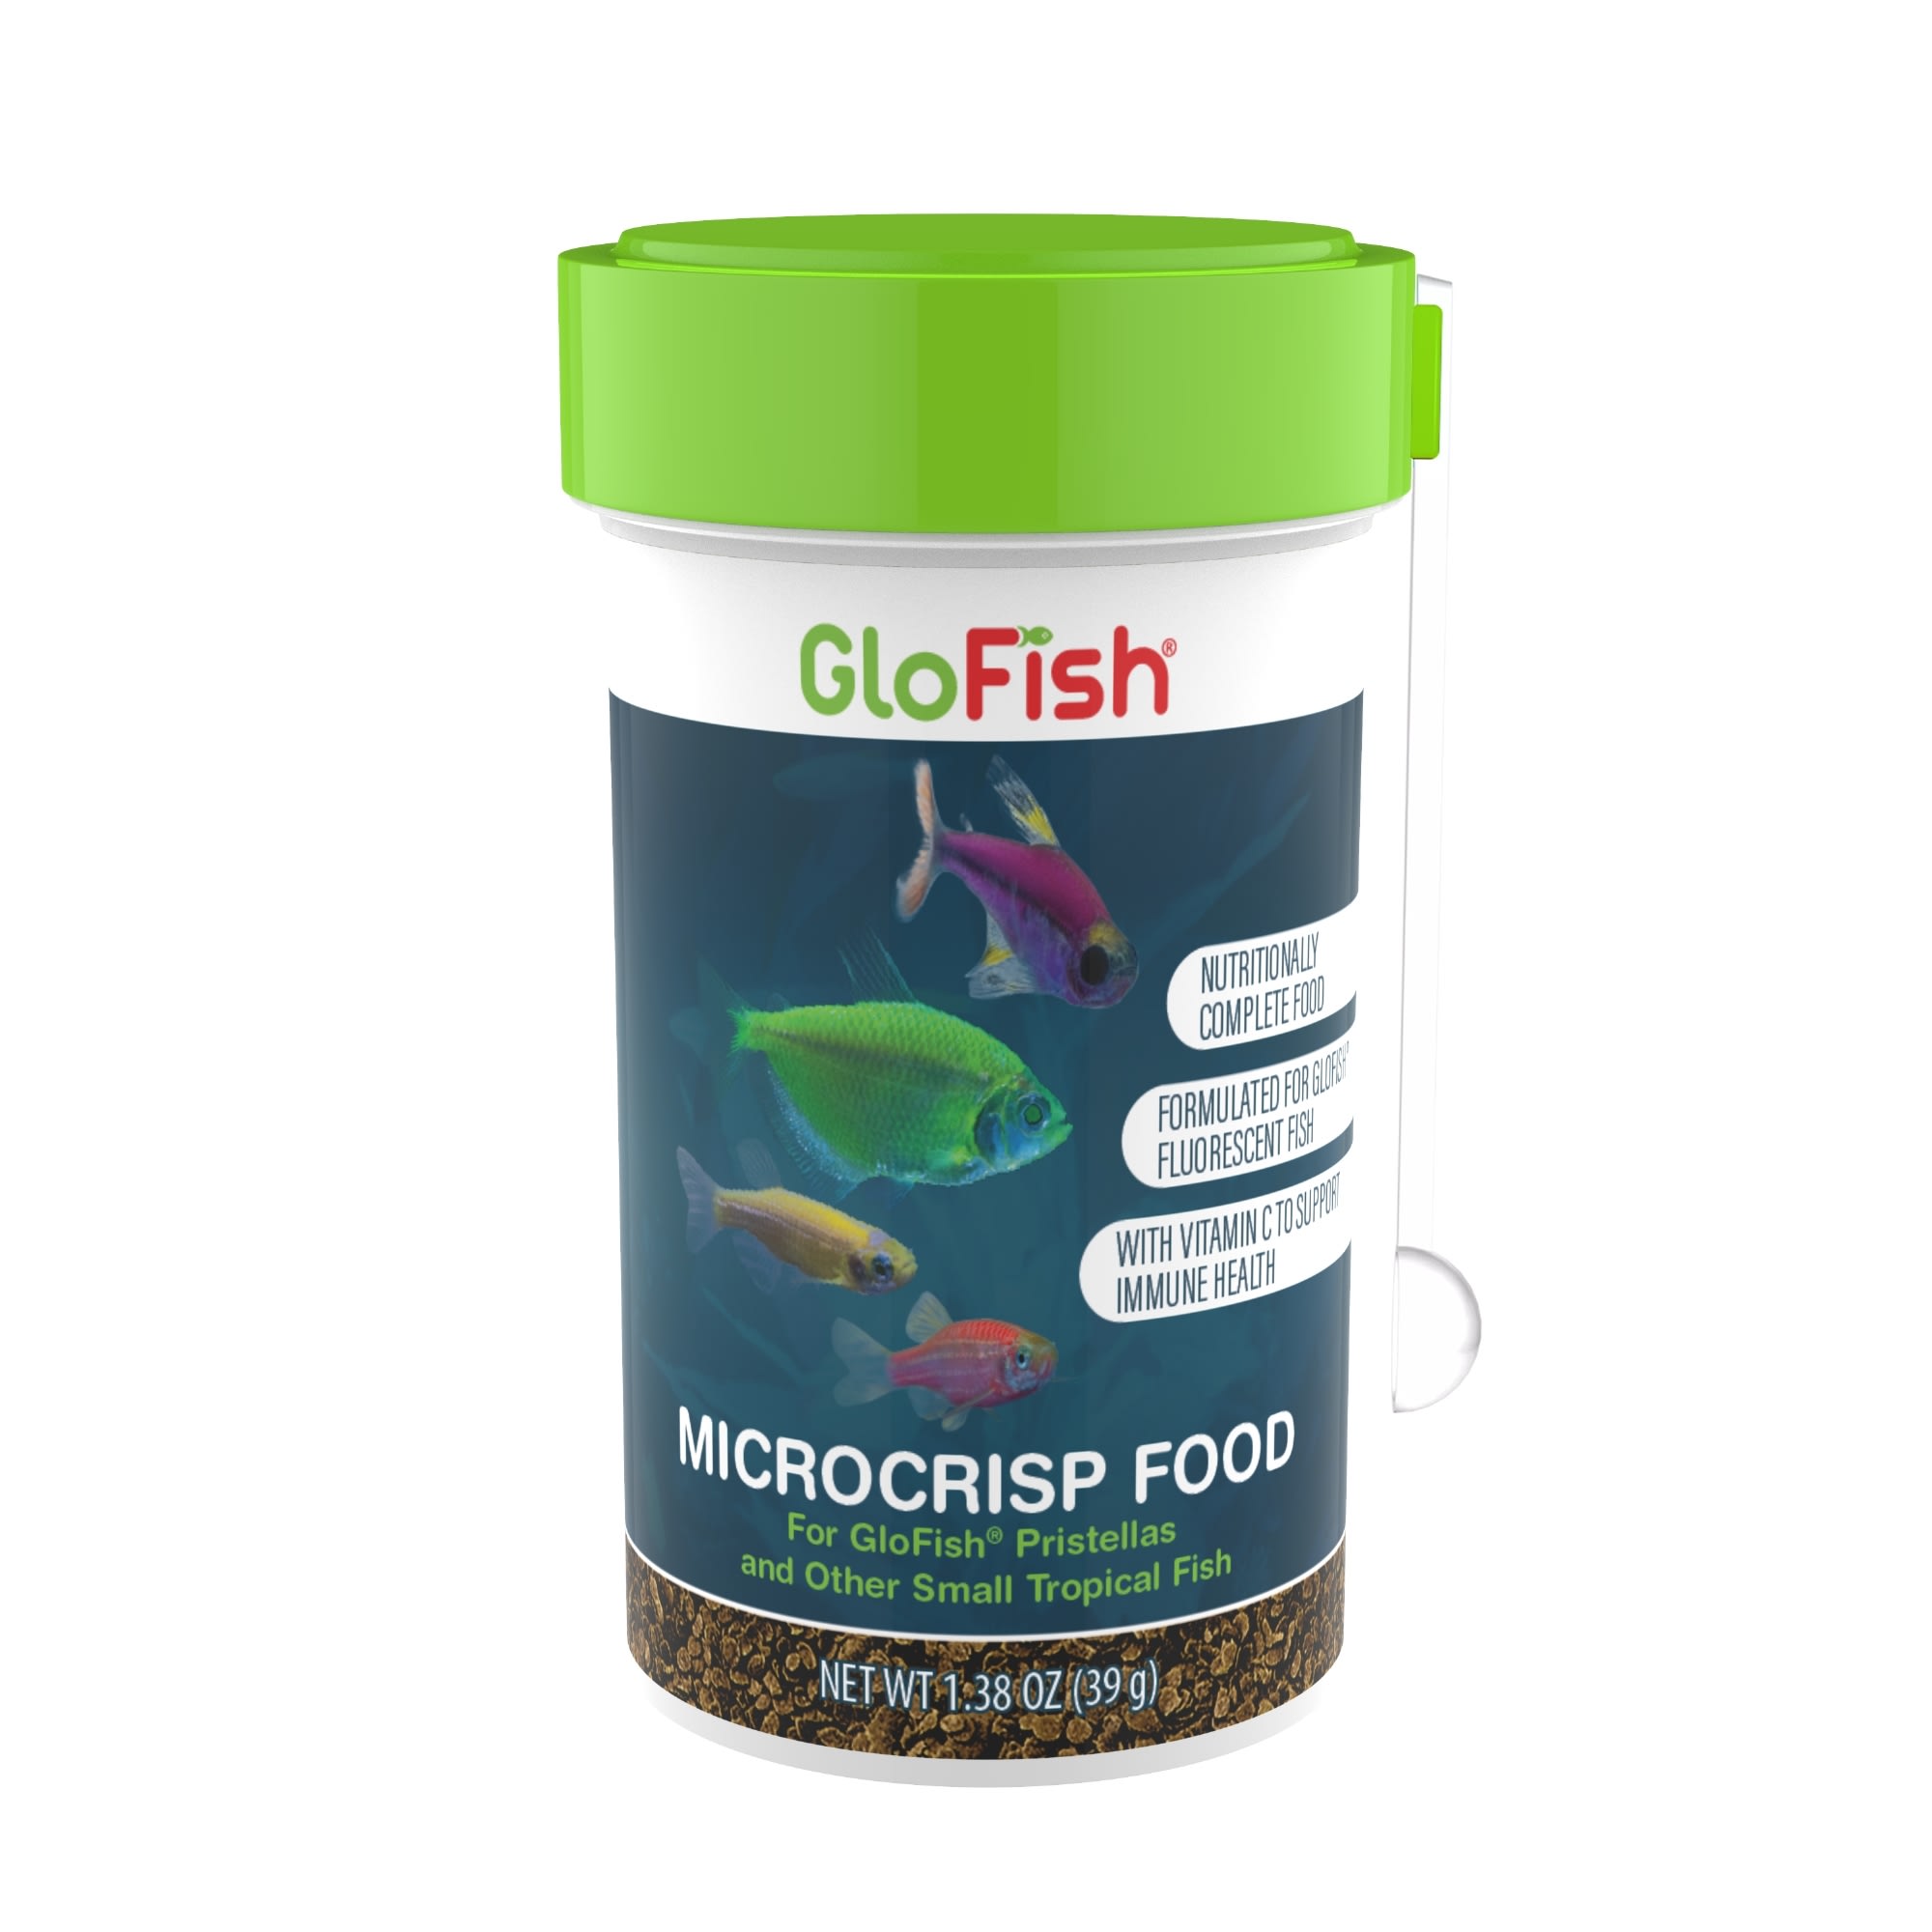 GloFish Microcrisp Nutritionally Complete Food for Small Tropical